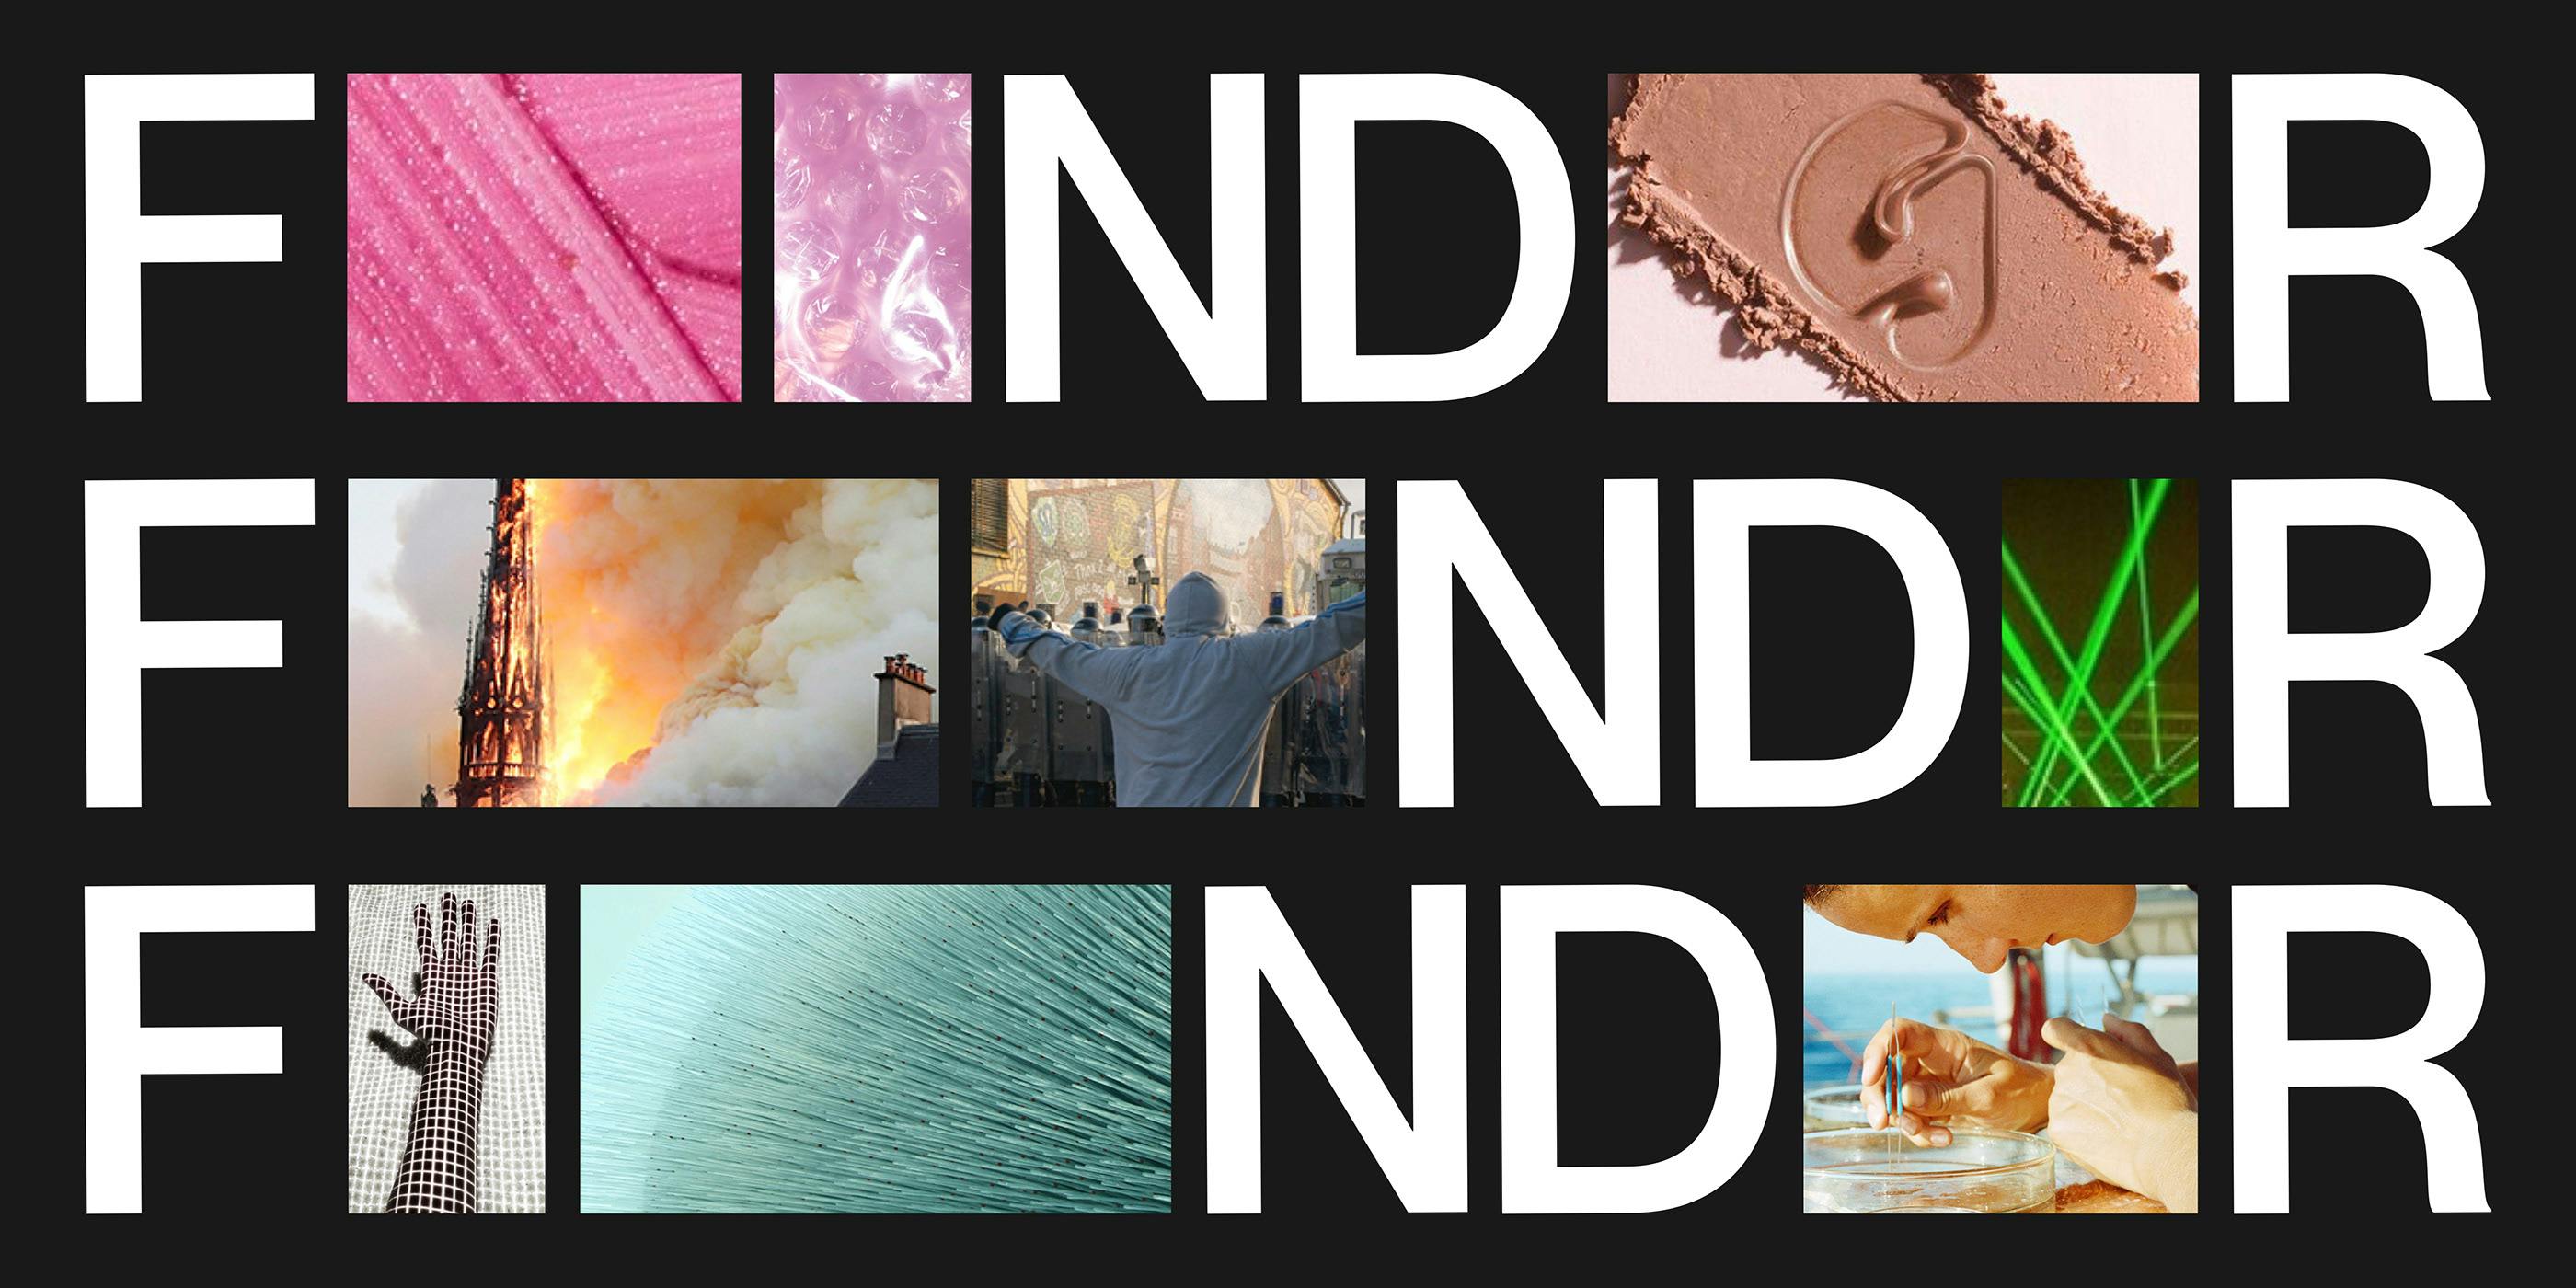 The FNDR logo repeated three times with pictures between the letters. First row has pink glittery images. The second row has a rocket ship taking off, a person in a hoodie speaking to a crowd, and green laser beams. The third row has a mesh hand, a teal abstract line picture, and a woman using tweezers to pick something out of a petri dish.